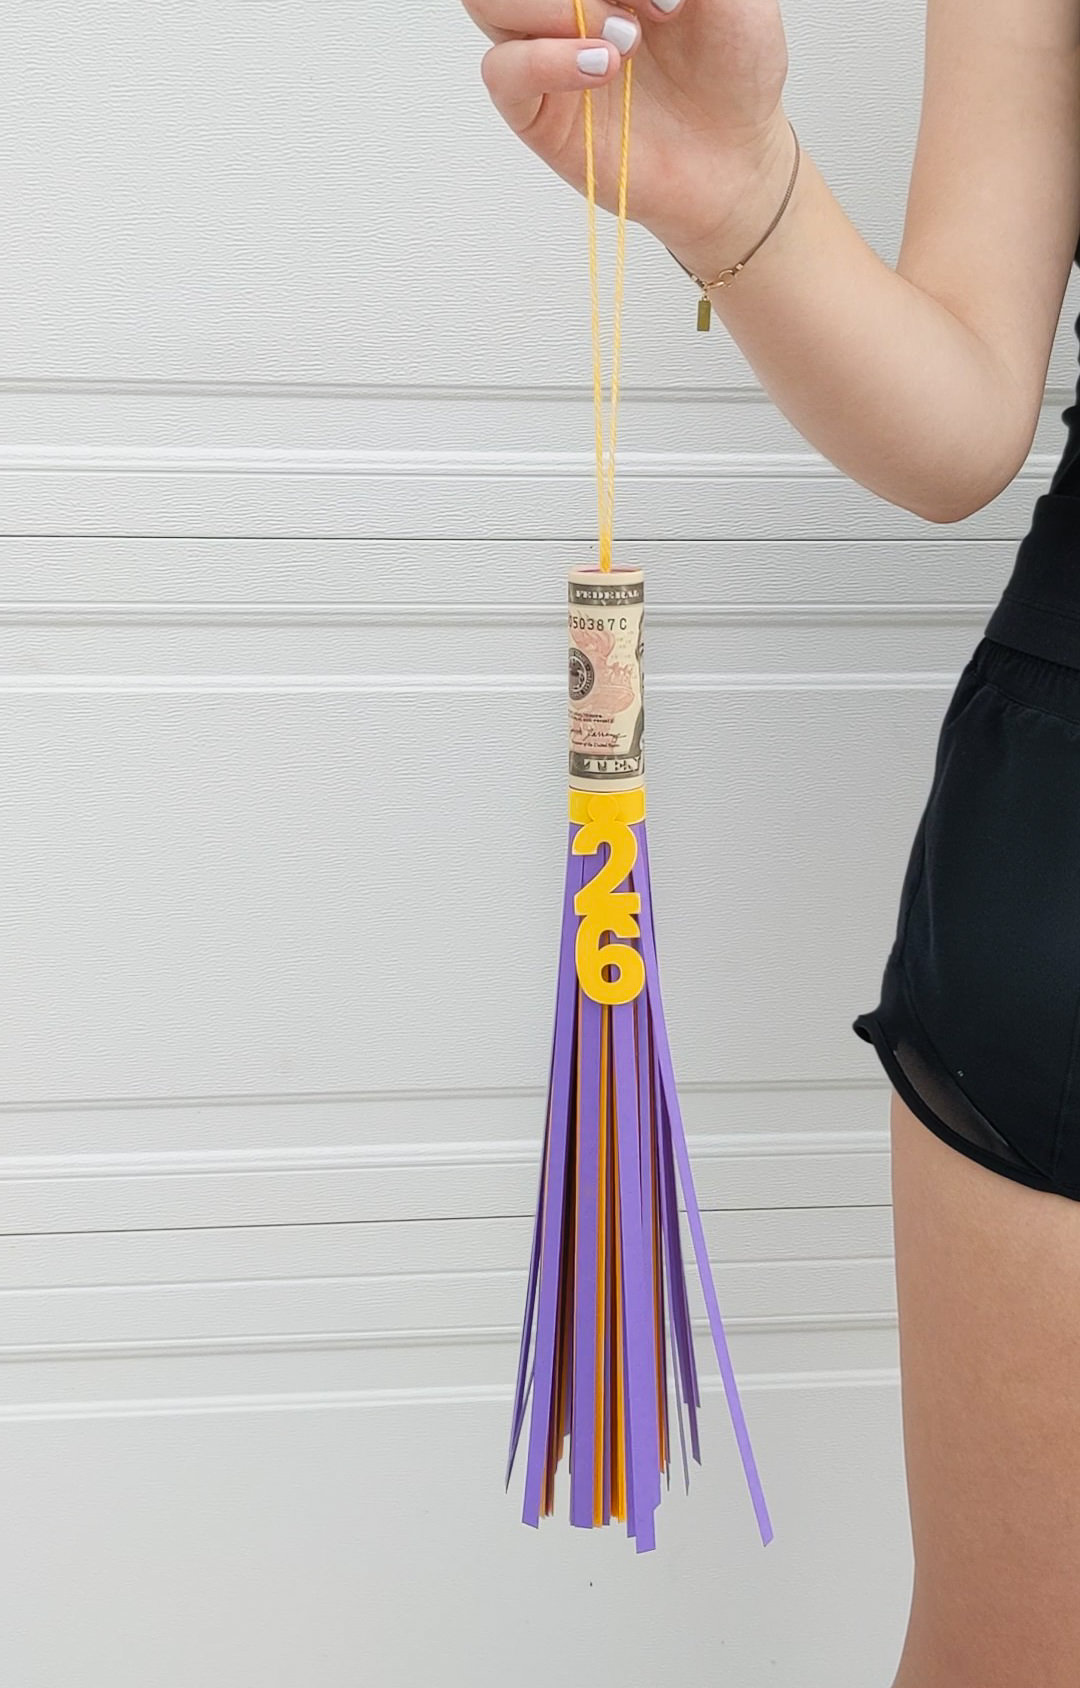 Big paper graduation tassel with money rolled inside for a graduation gift